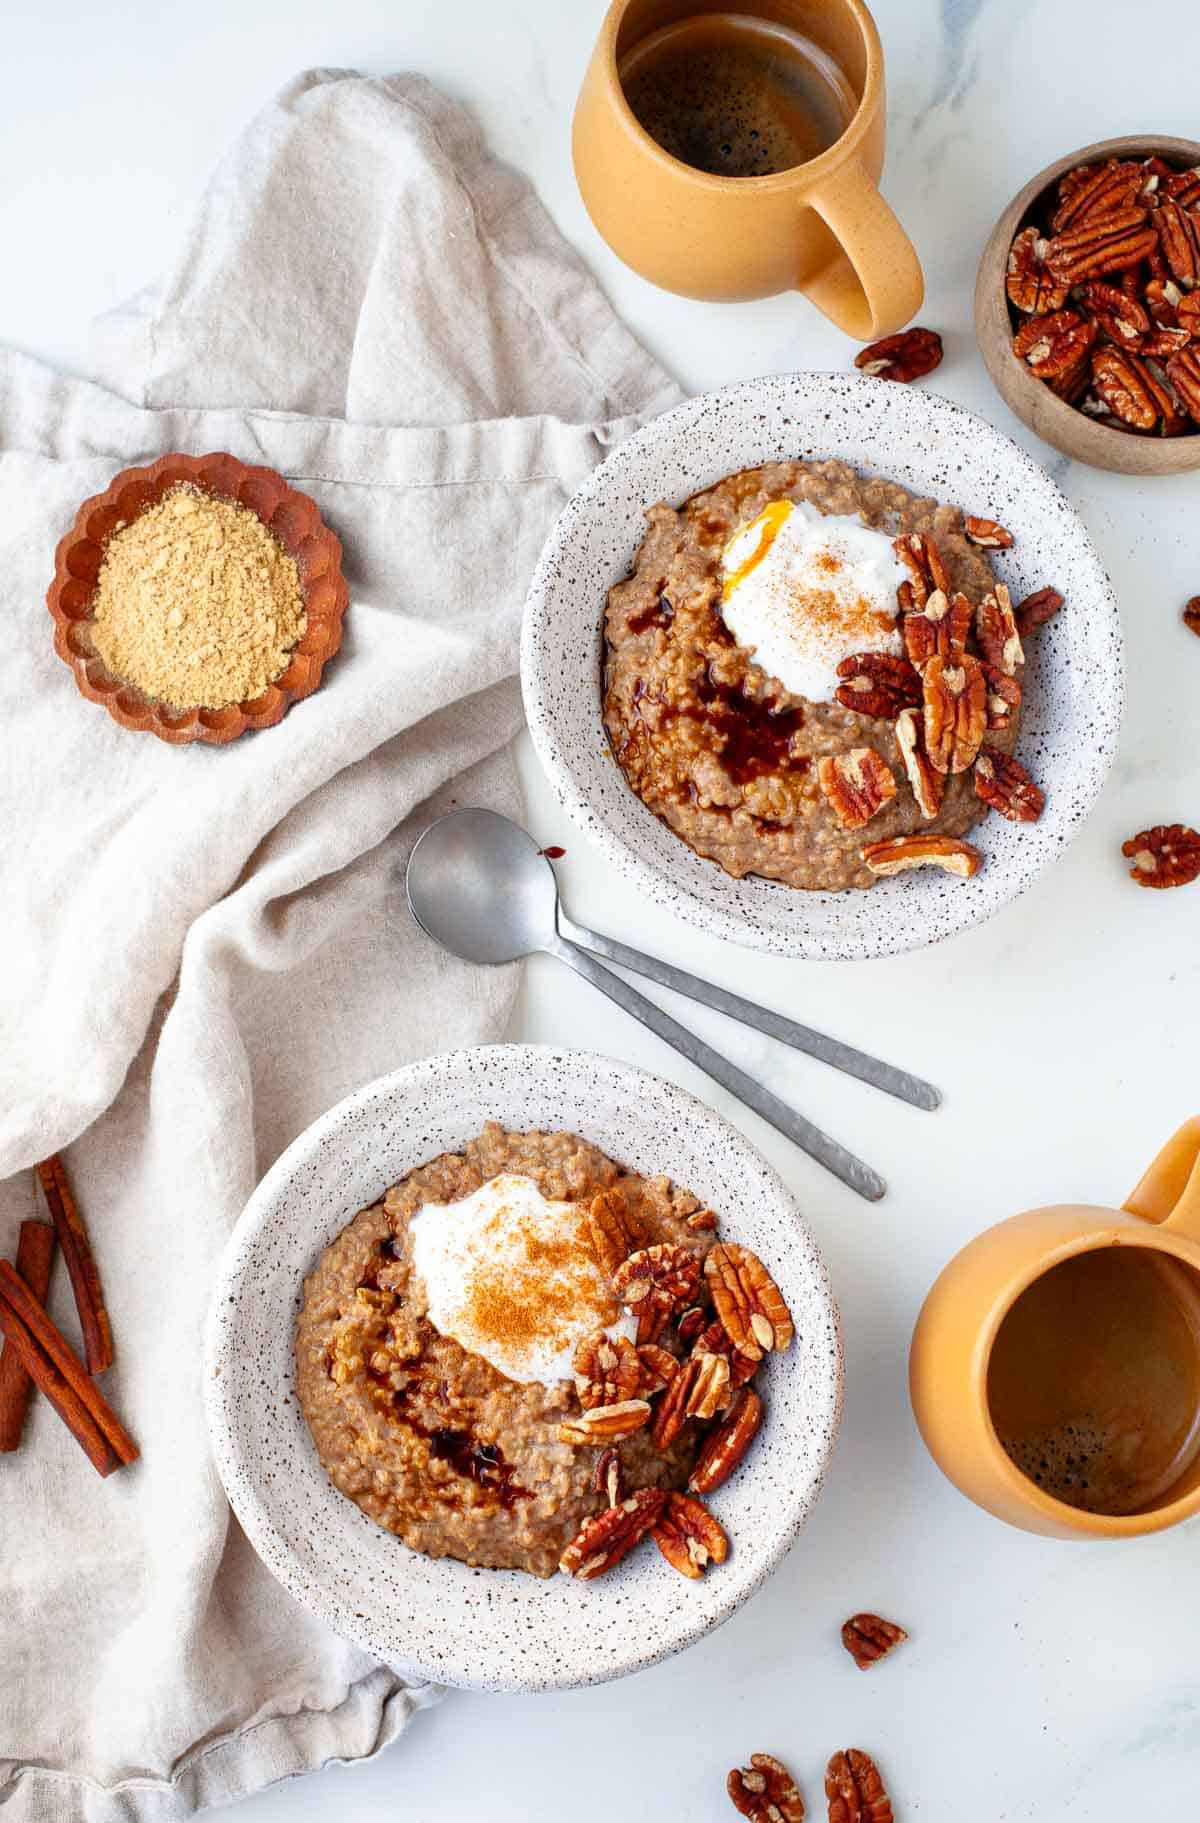 Two white speckled bowls filled with oat gingerbread with yogurt, pecans and cinnamon next to two orange coffee mugs, a small bowl of pecans and a kitchen towel